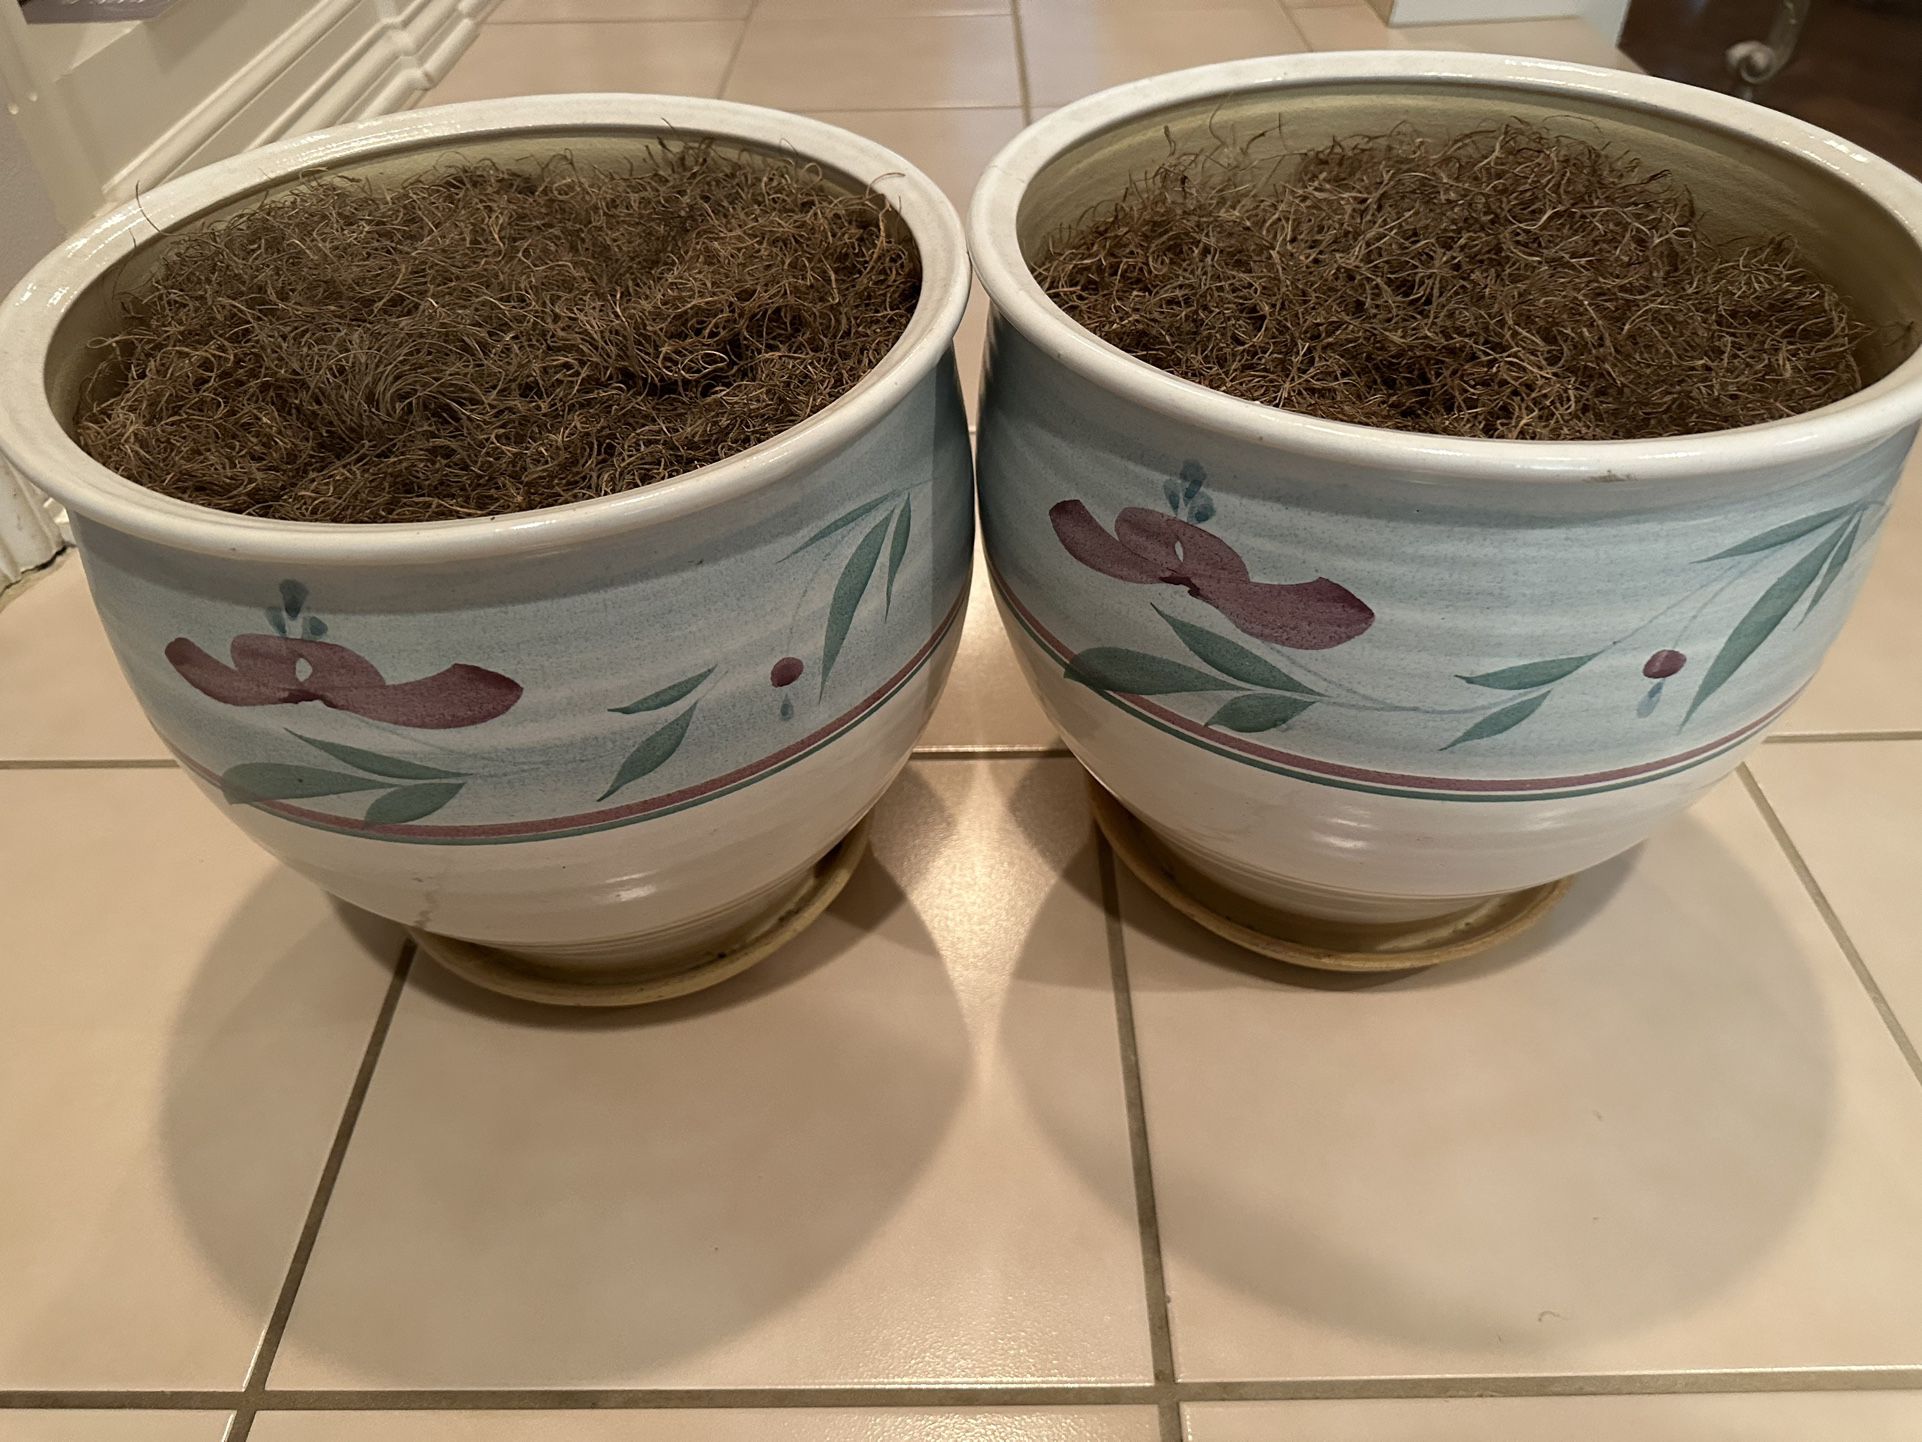 Pair Of 12”x12”  Decorative Ceramic Planter Pots With Shredded Brown Filling And Built-in Saucers